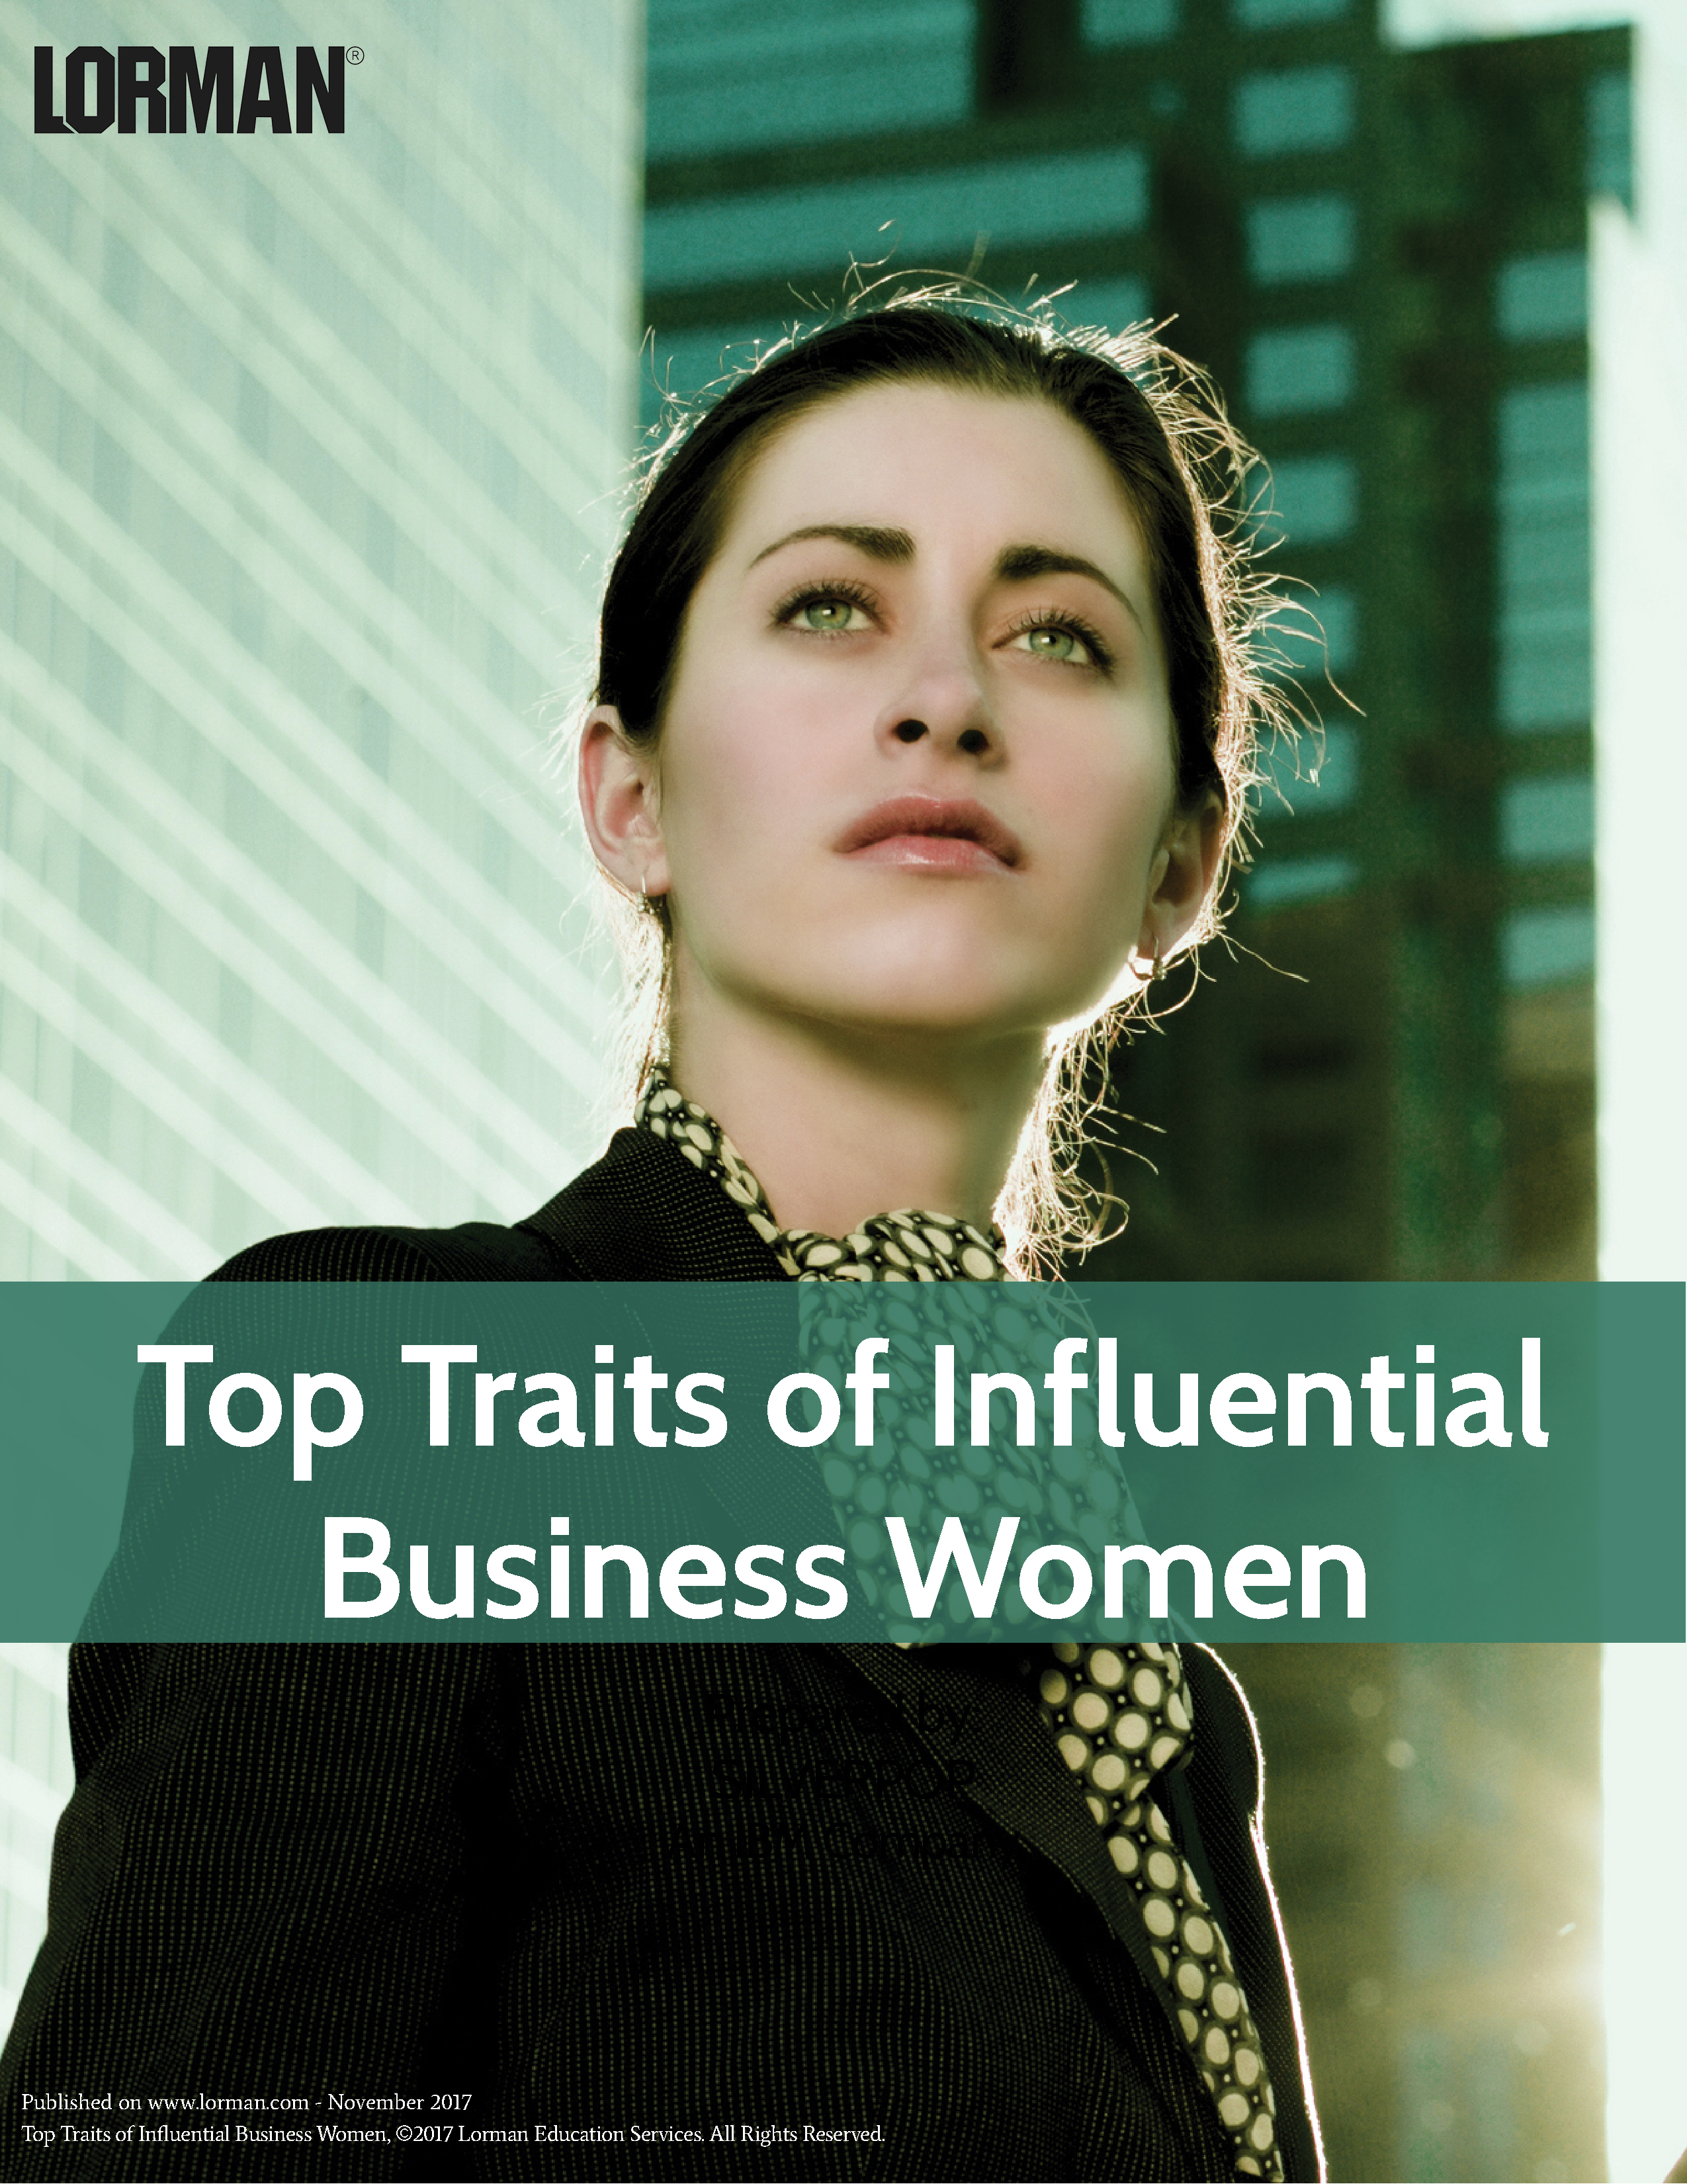 Top Traits of Influential Business Women